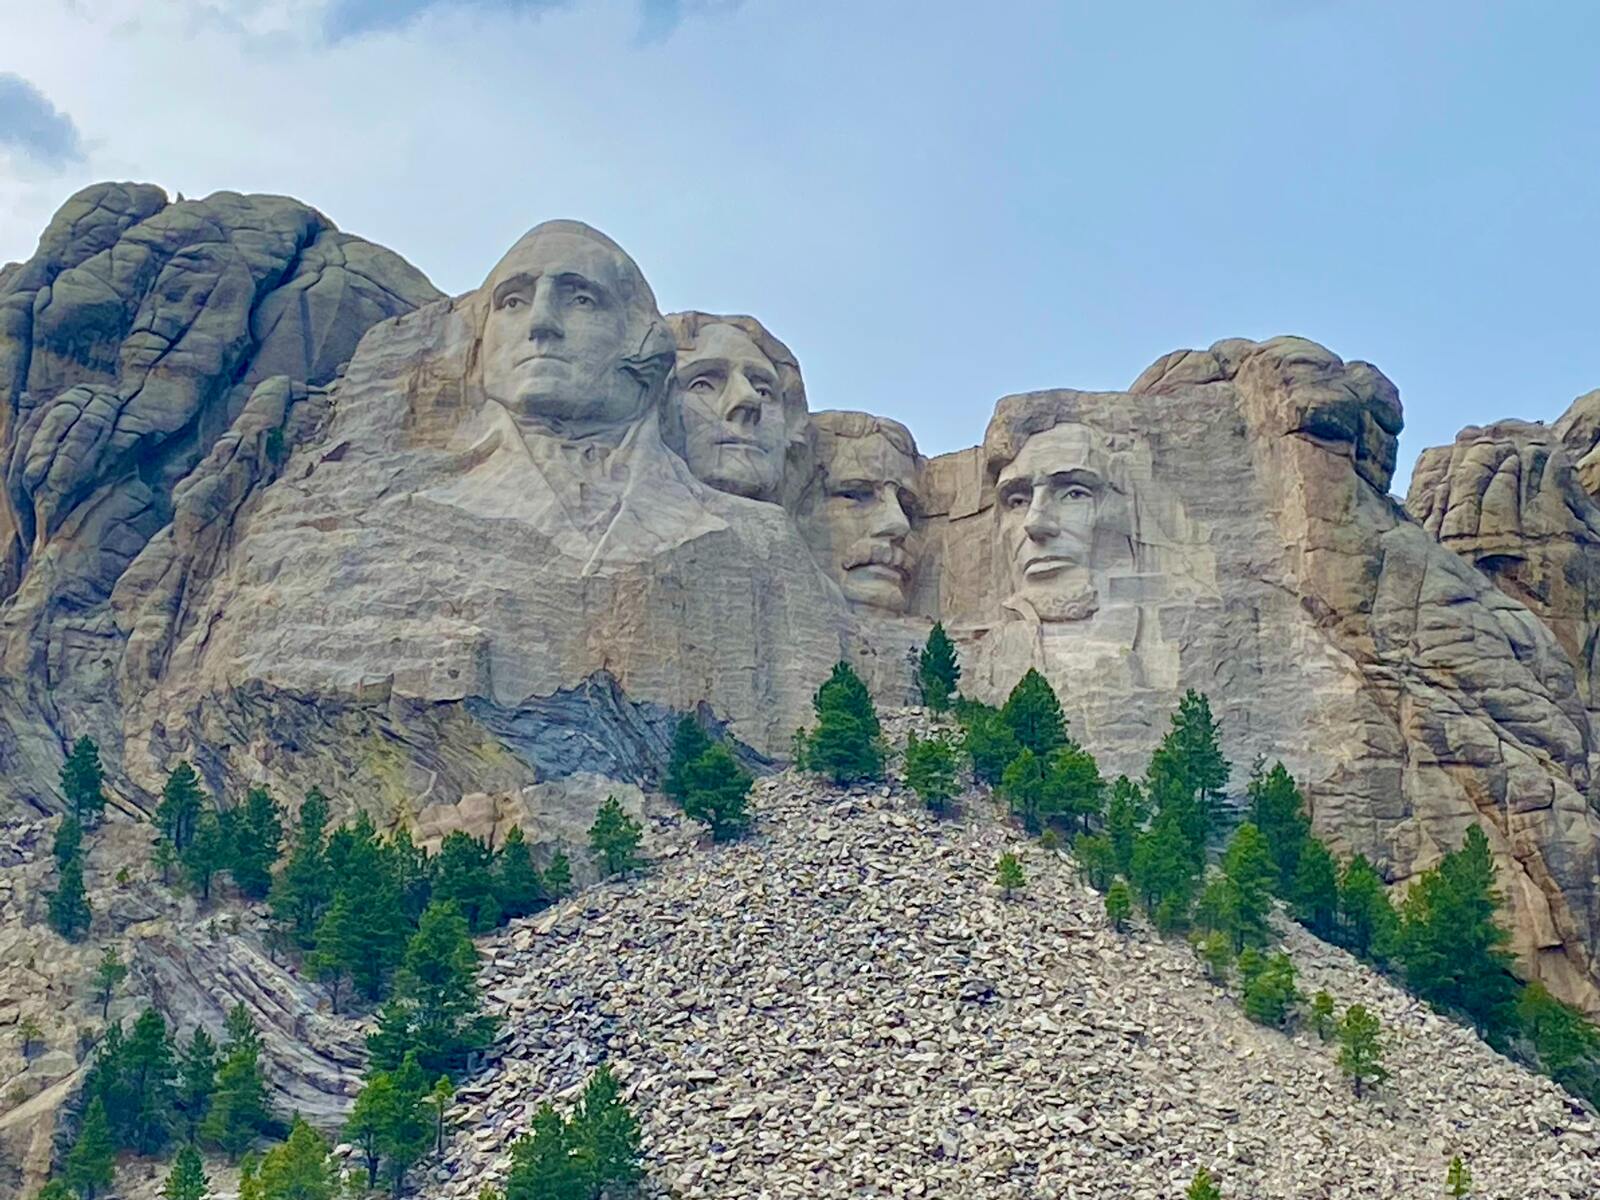 Image of Mount Rushmore National Memorial by Team PhotoHound